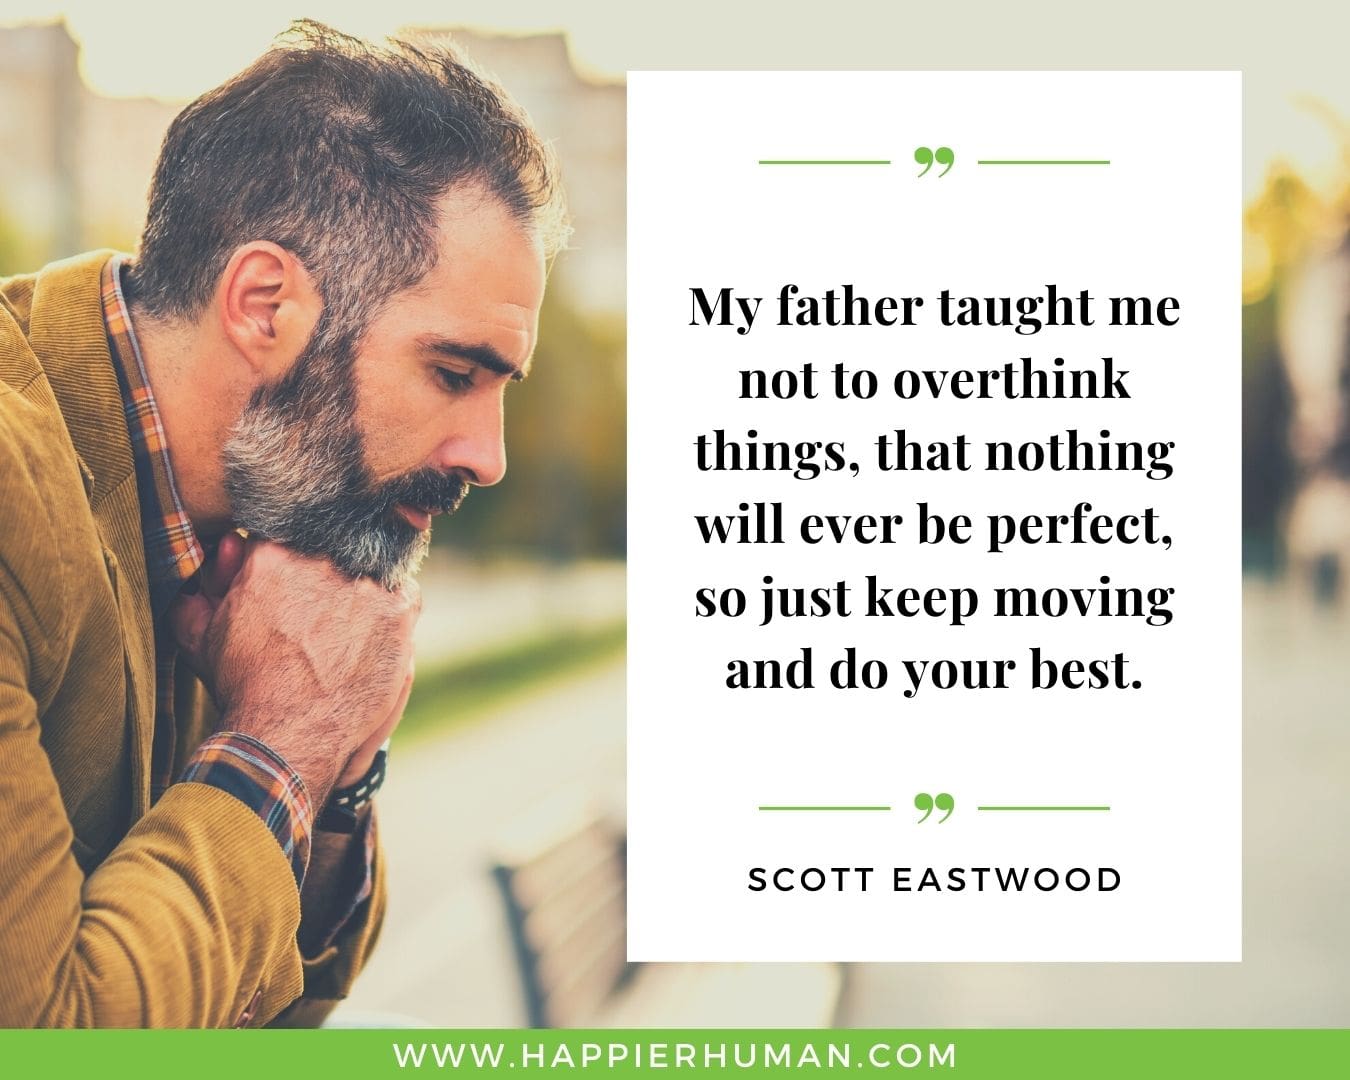 Overthinking Quotes - "My father taught me not to overthink things, that nothing will ever be perfect, so just keep moving and do your best." - Scott Eastwood